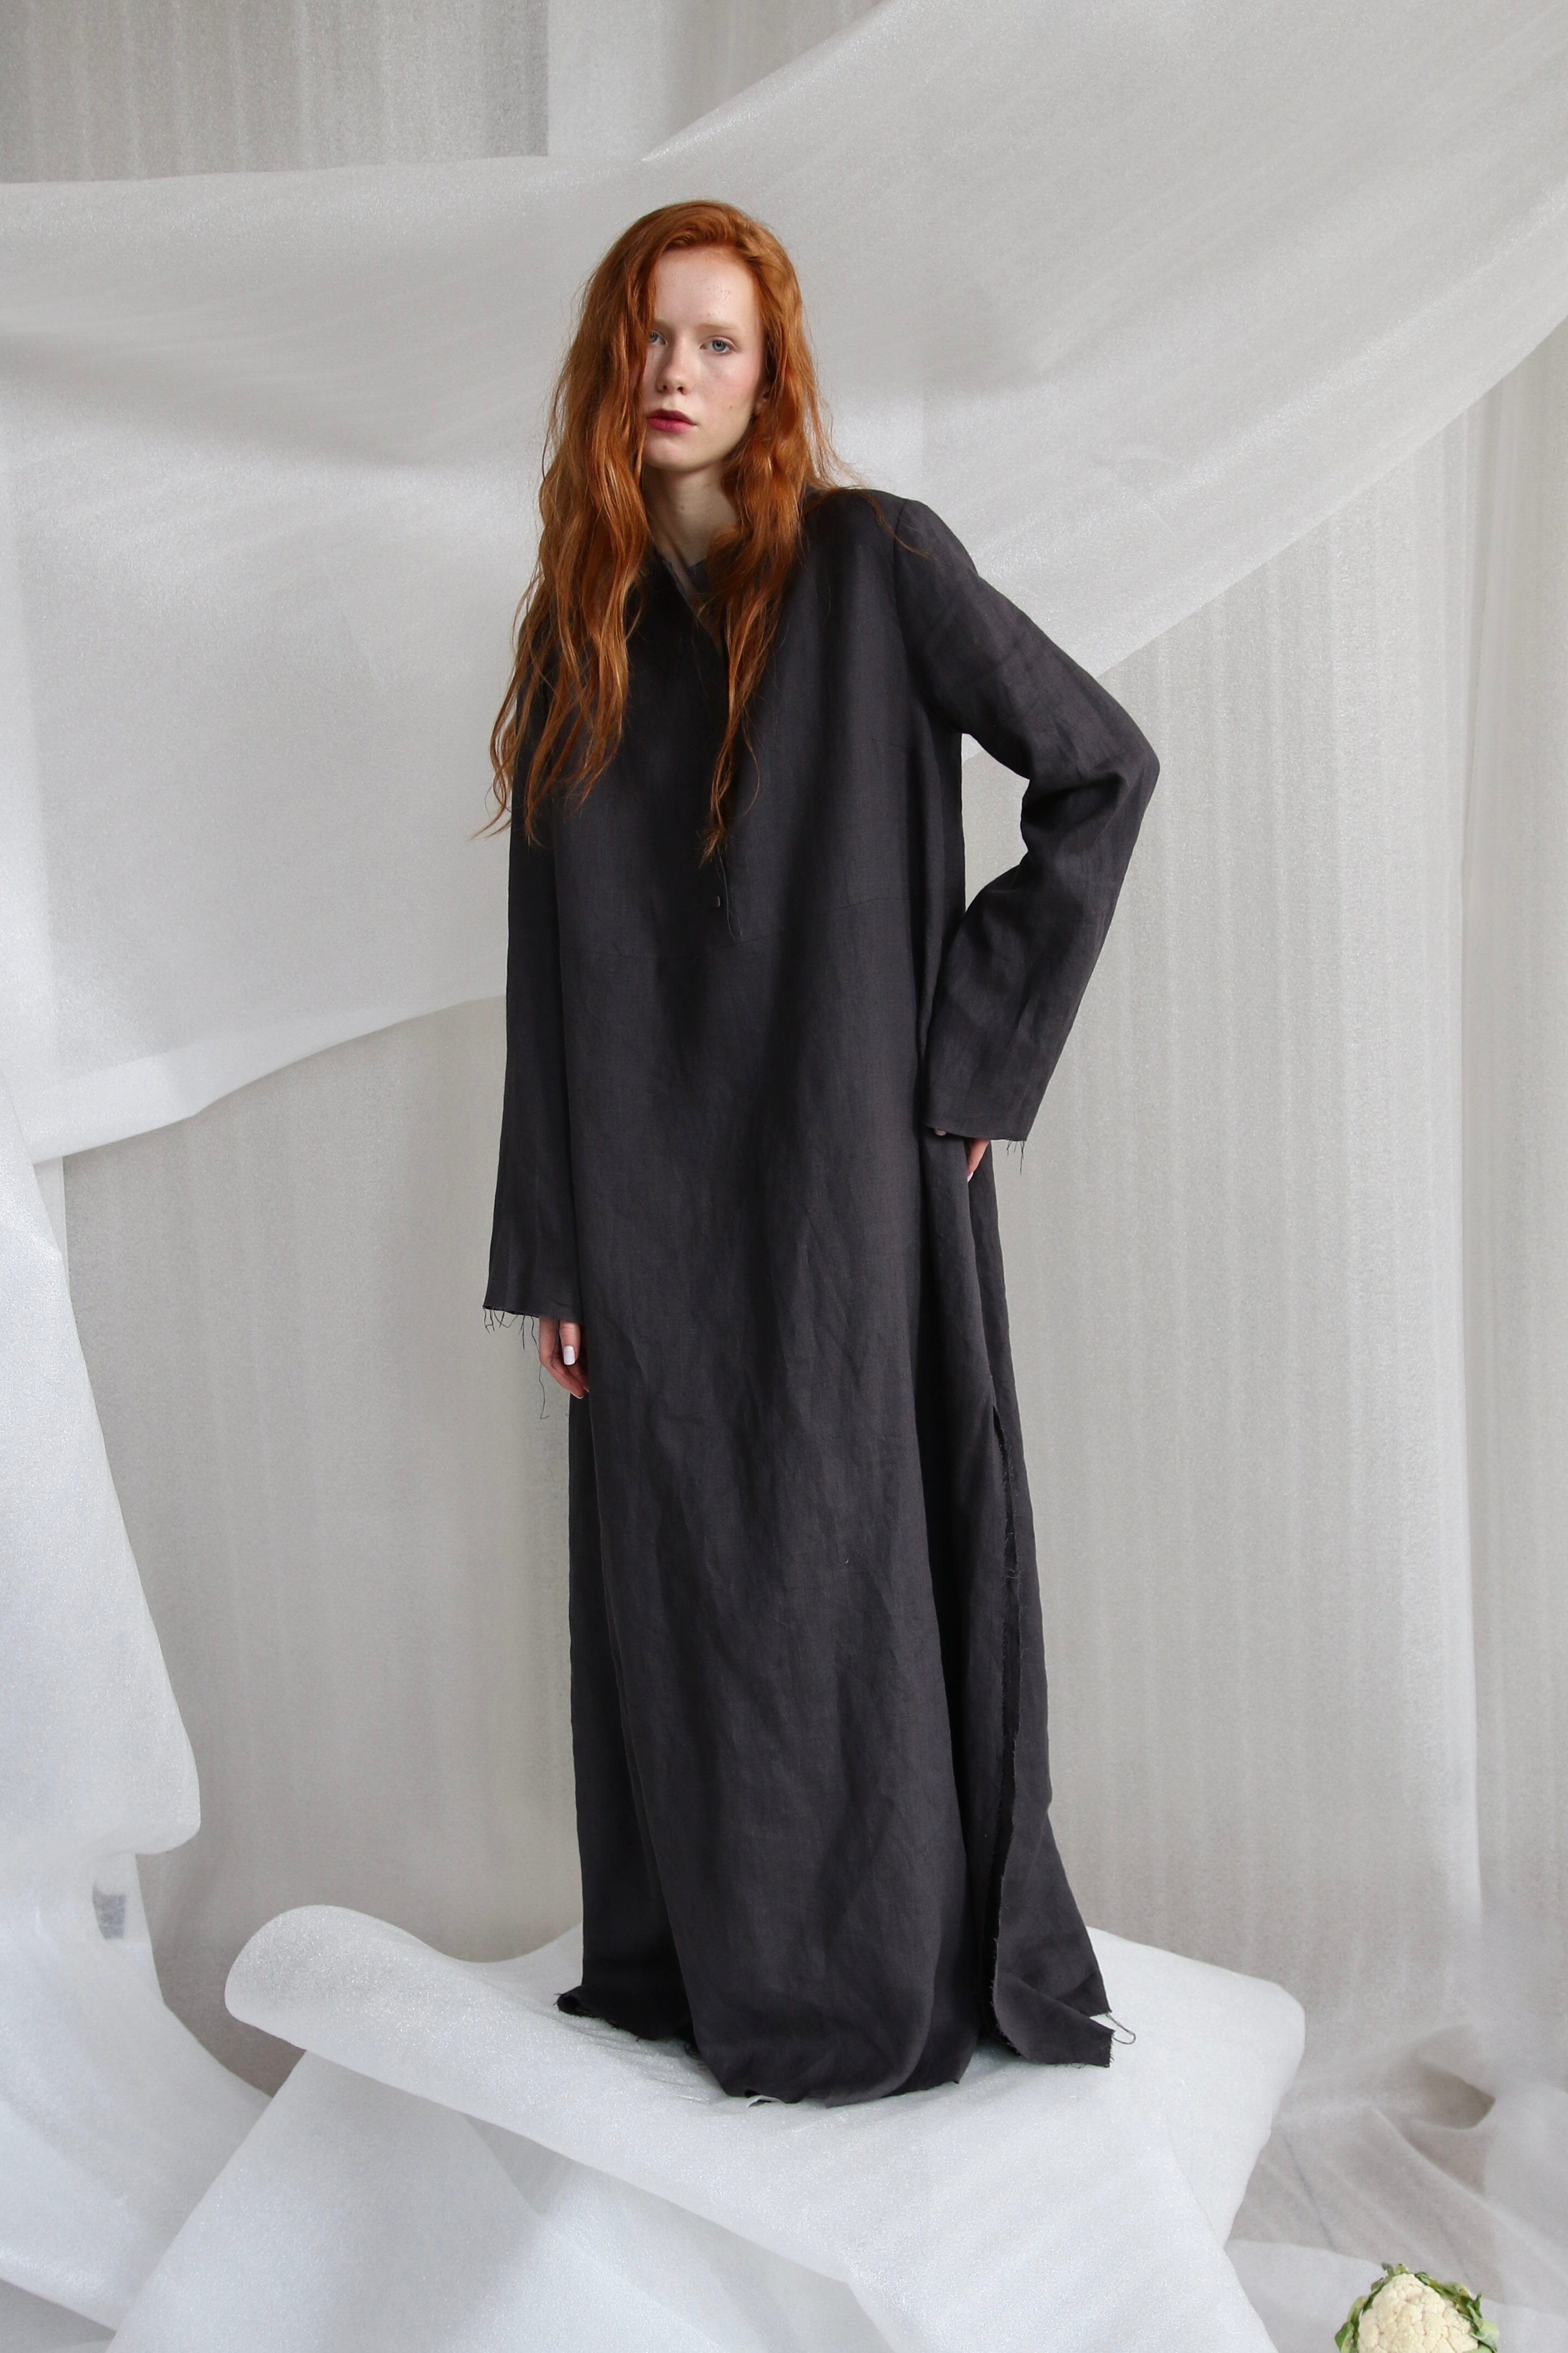  Anthracite Oversized Linen Dress Product Amoralle